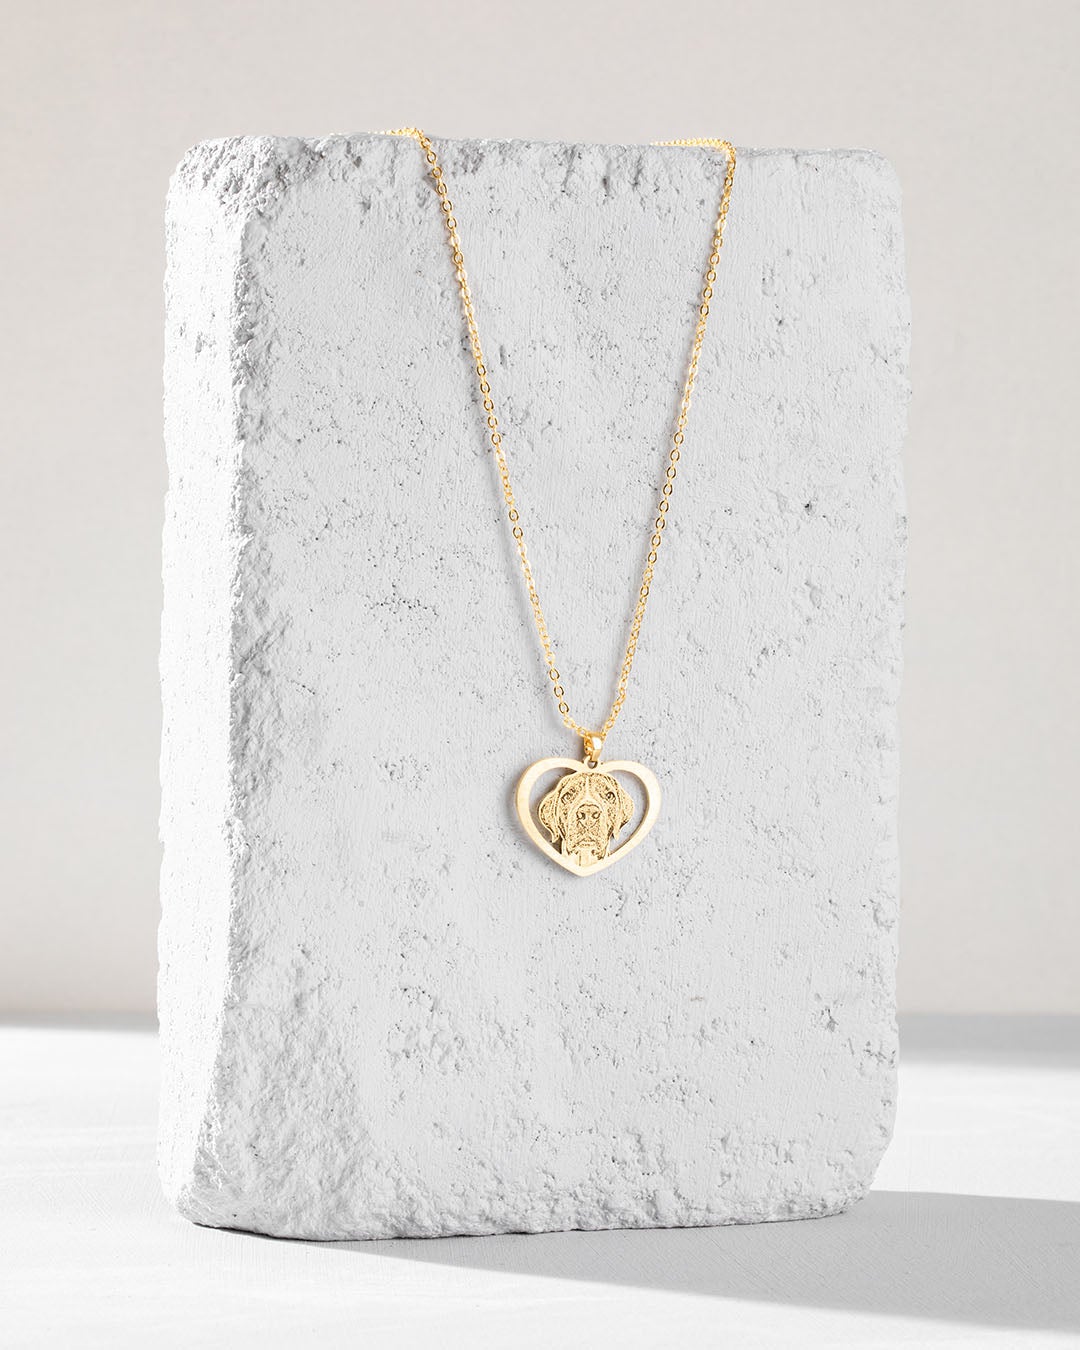 Dog memorial gifts, gold halo heart necklace front